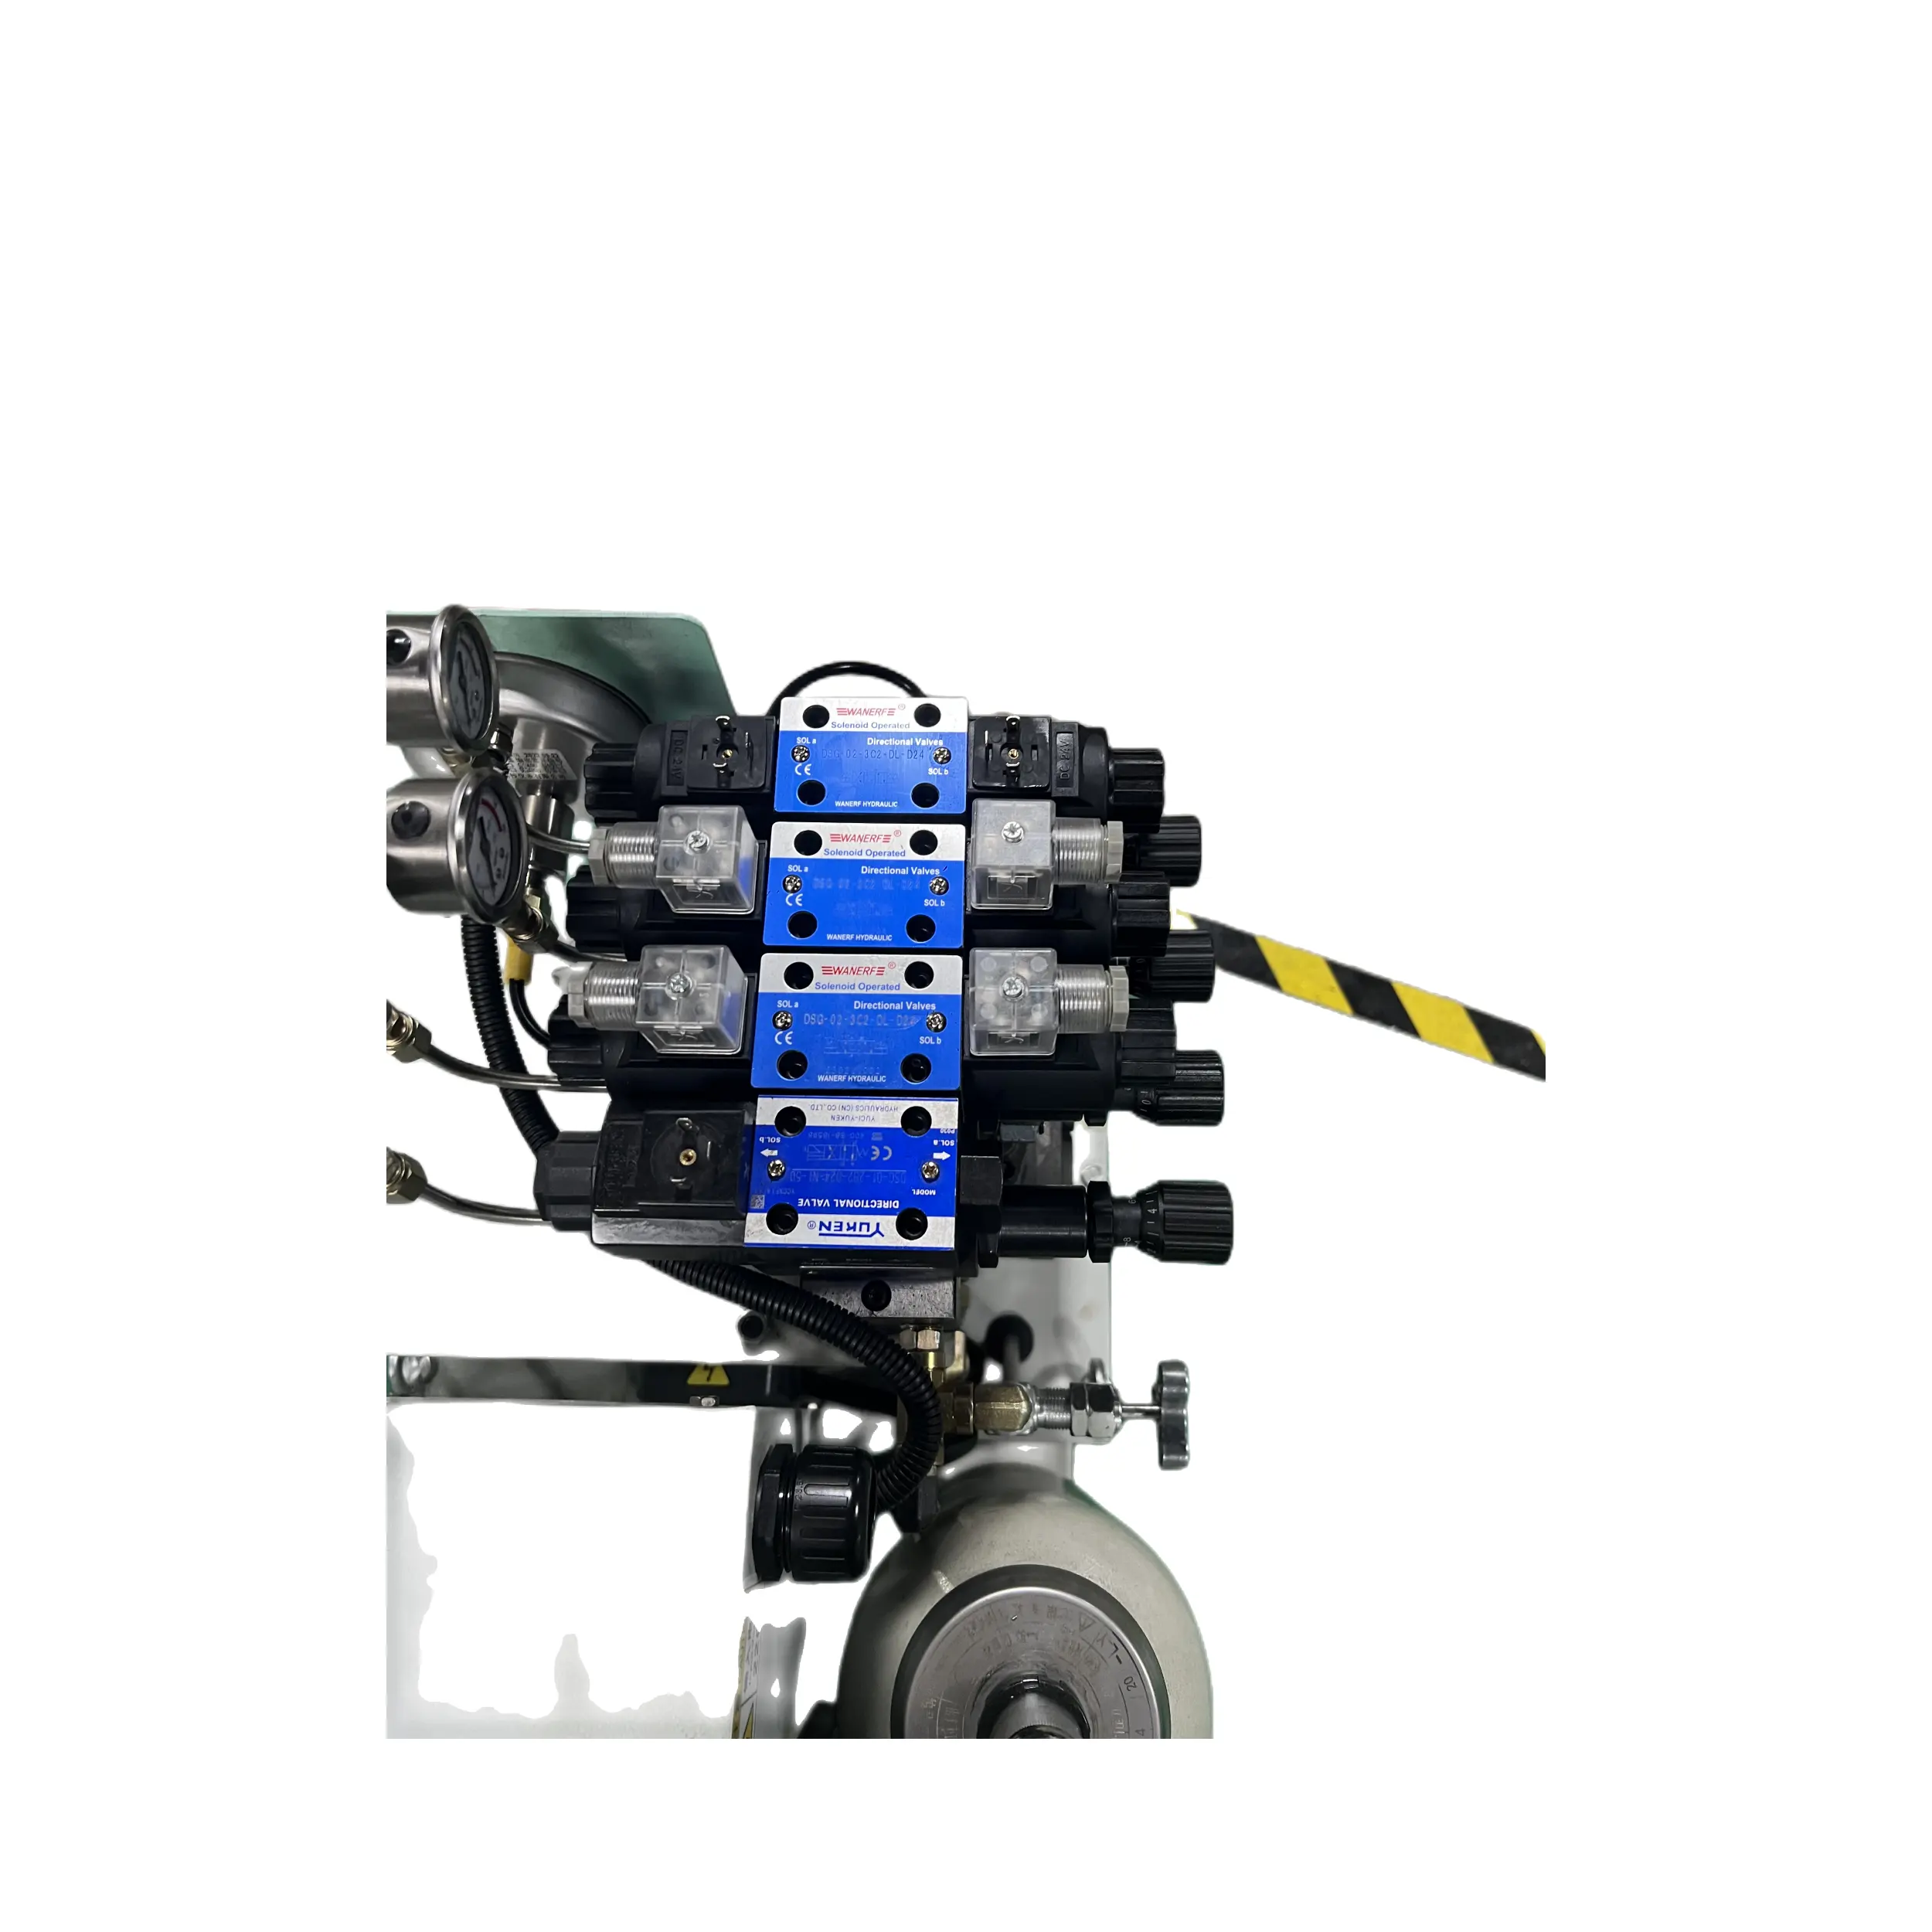 Double flow ultra-high pressure solenoid valve control non-standard hydraulic station can be designed and customized